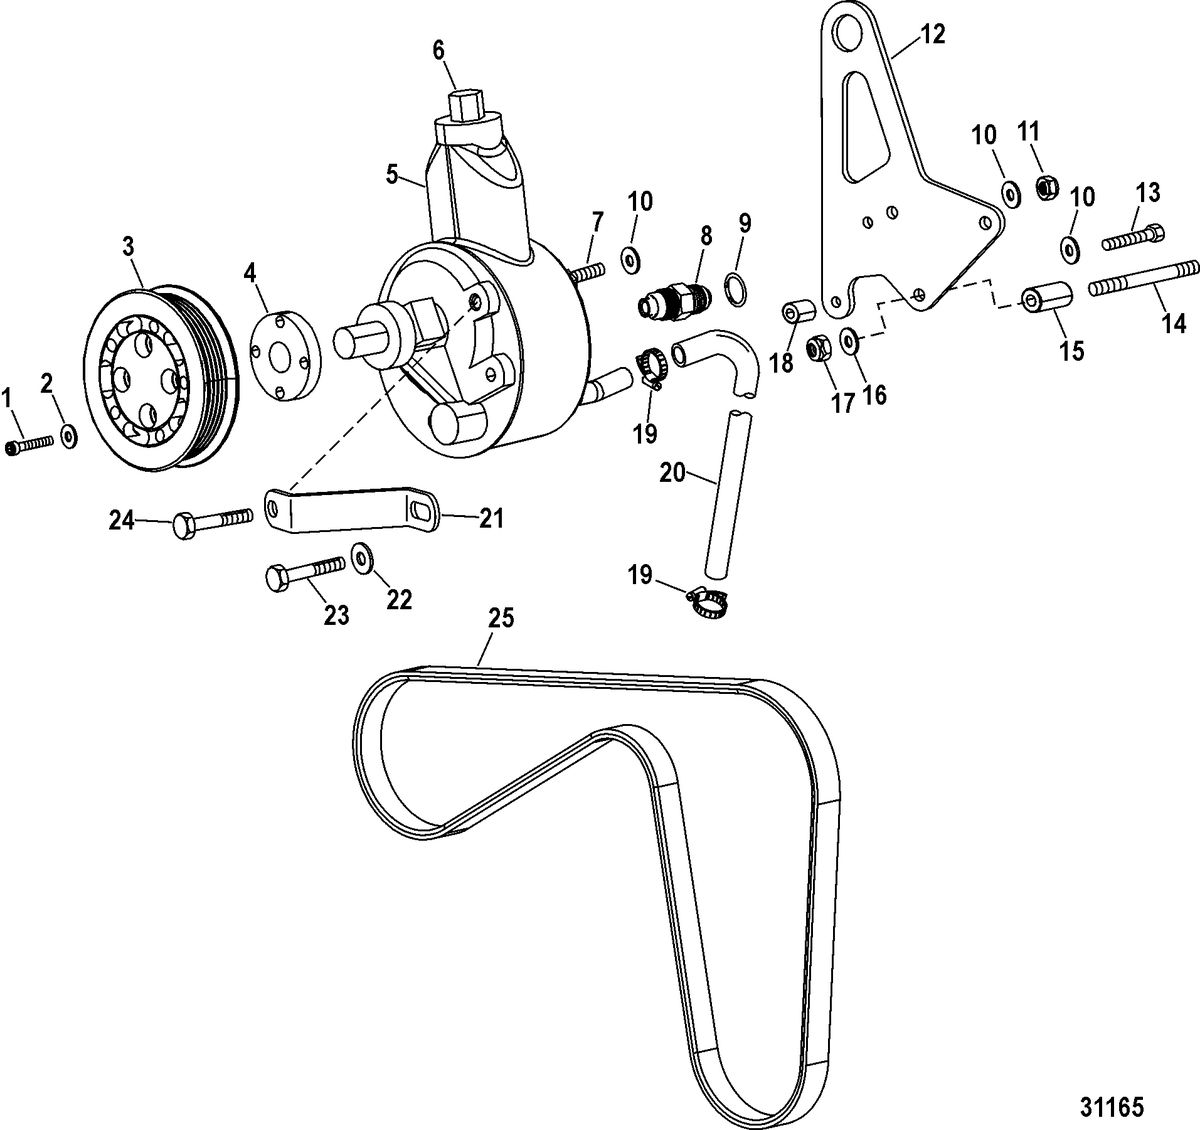 RACE STERNDRIVE 1075 SCI Power-Assisted Steering Components(Design II)